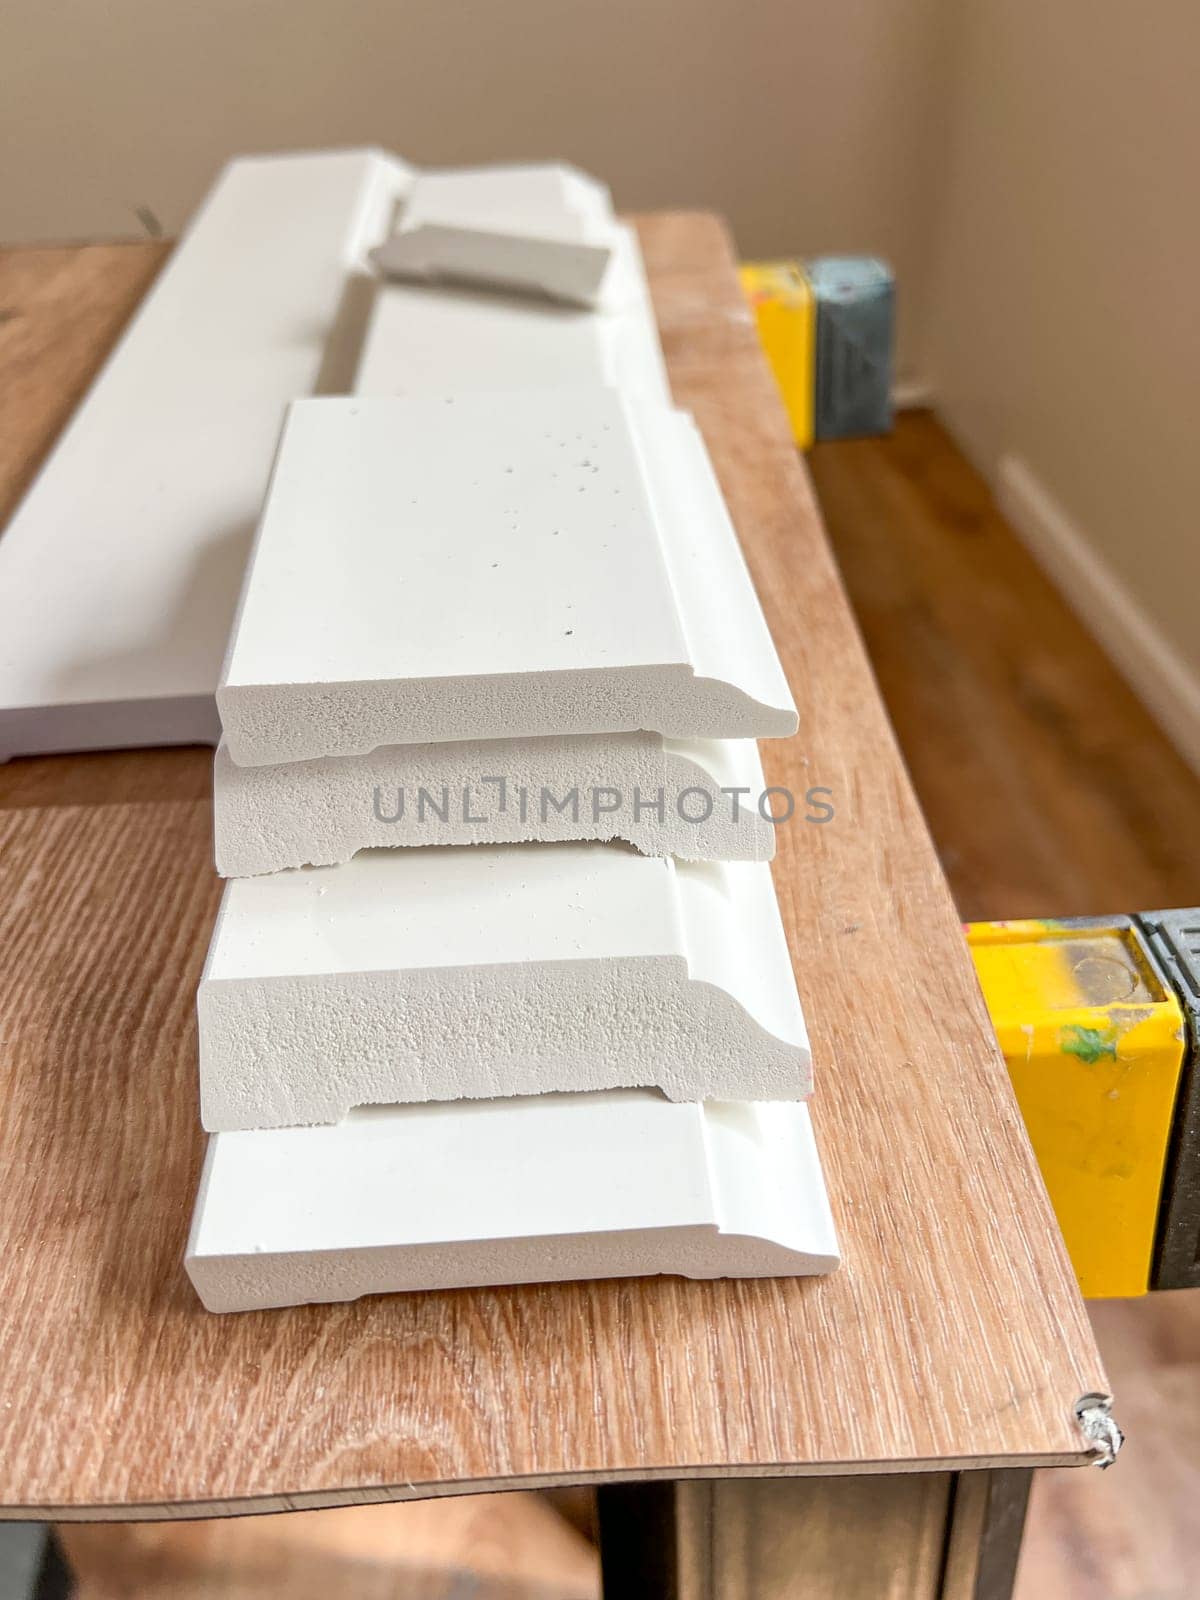 Installing Vinyl Baseboards in a Modern Home Renovation Project by arinahabich